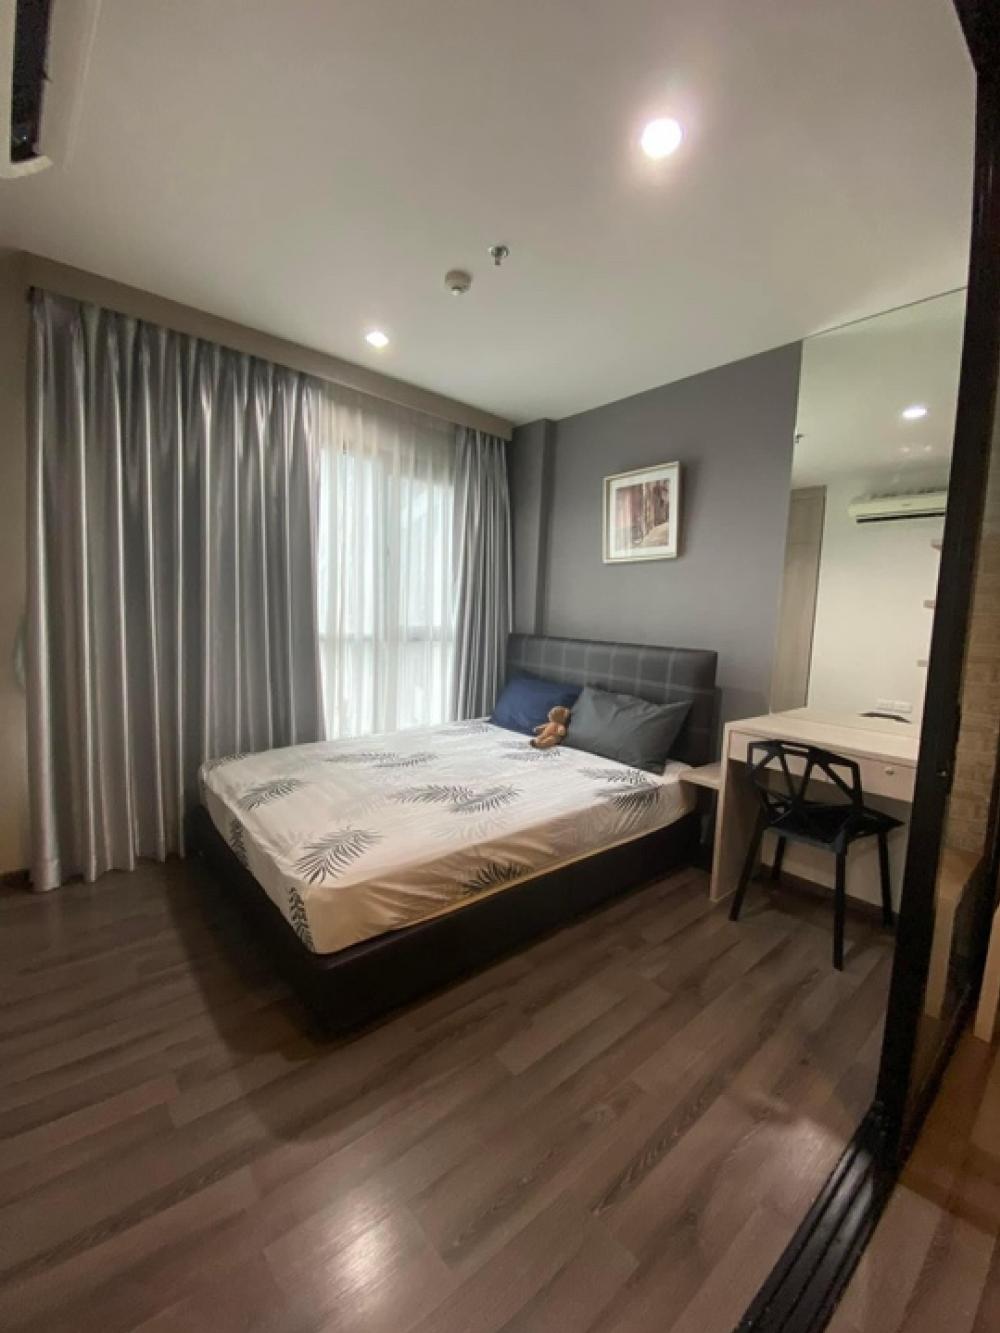 For RentCondoOnnut, Udomsuk : 📣 Condo for rent, The Base Park West (The Base Park West), 1 bedroom, 1 bathroom, size 27 sq m., 36th floor, city view 🚆 Convenient transportation, near BTS On Nut, complete furniture and electrical appliances. Ready to move in ✨